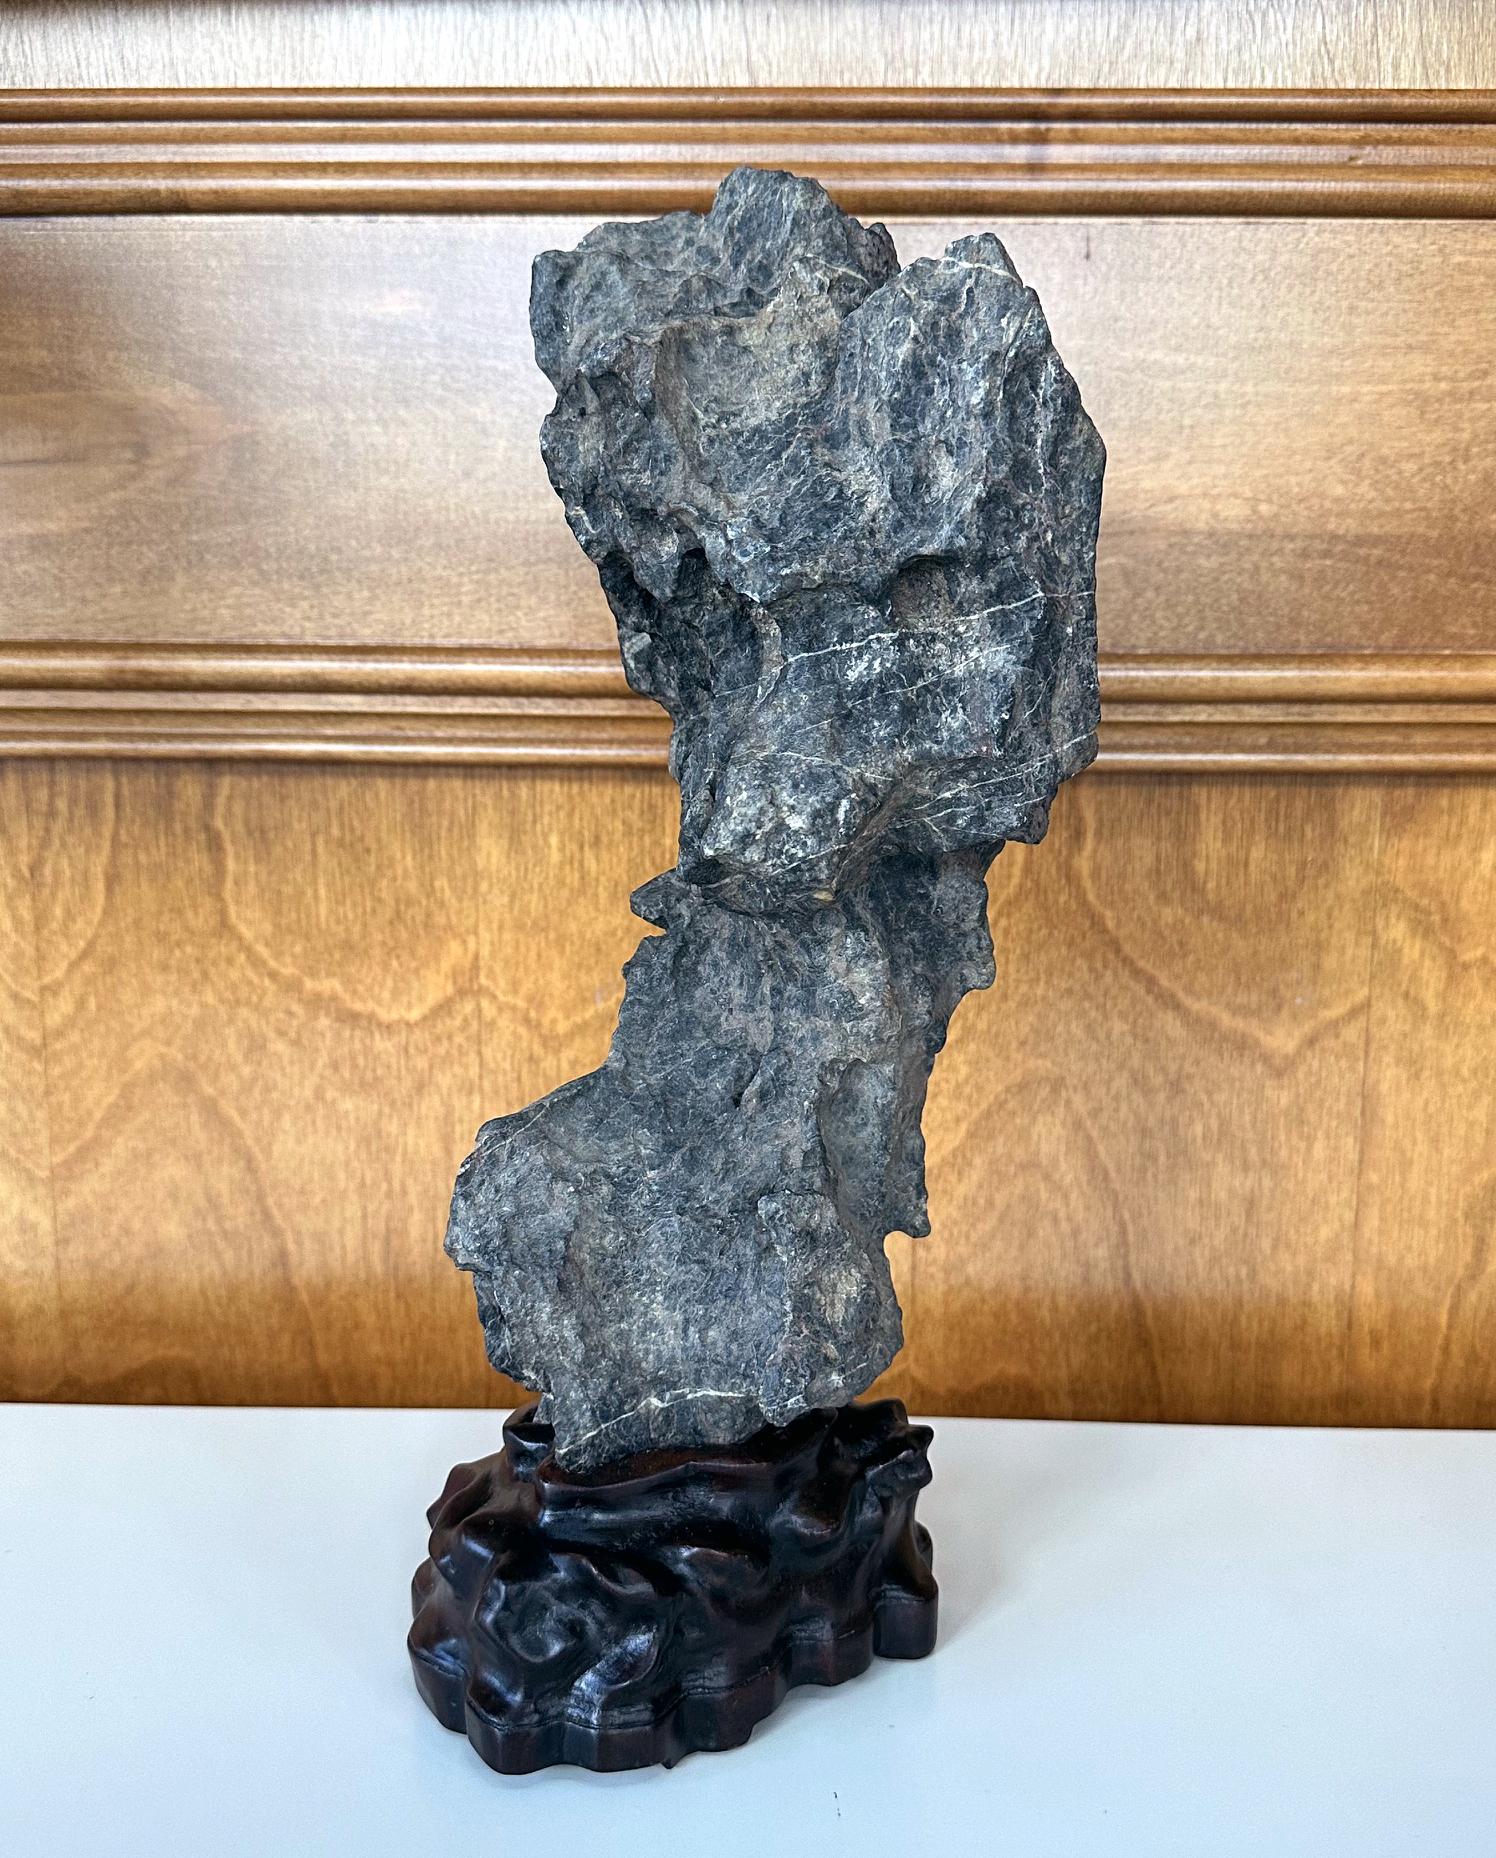 An intriguing Chinese scholar rock in vertical form presented on a custom hand-carved wood stand circa late Qing Dynasty. The greyish black stone is of Yingde type. Its upright form is poetic and nicely balanced, reminding one the limestone